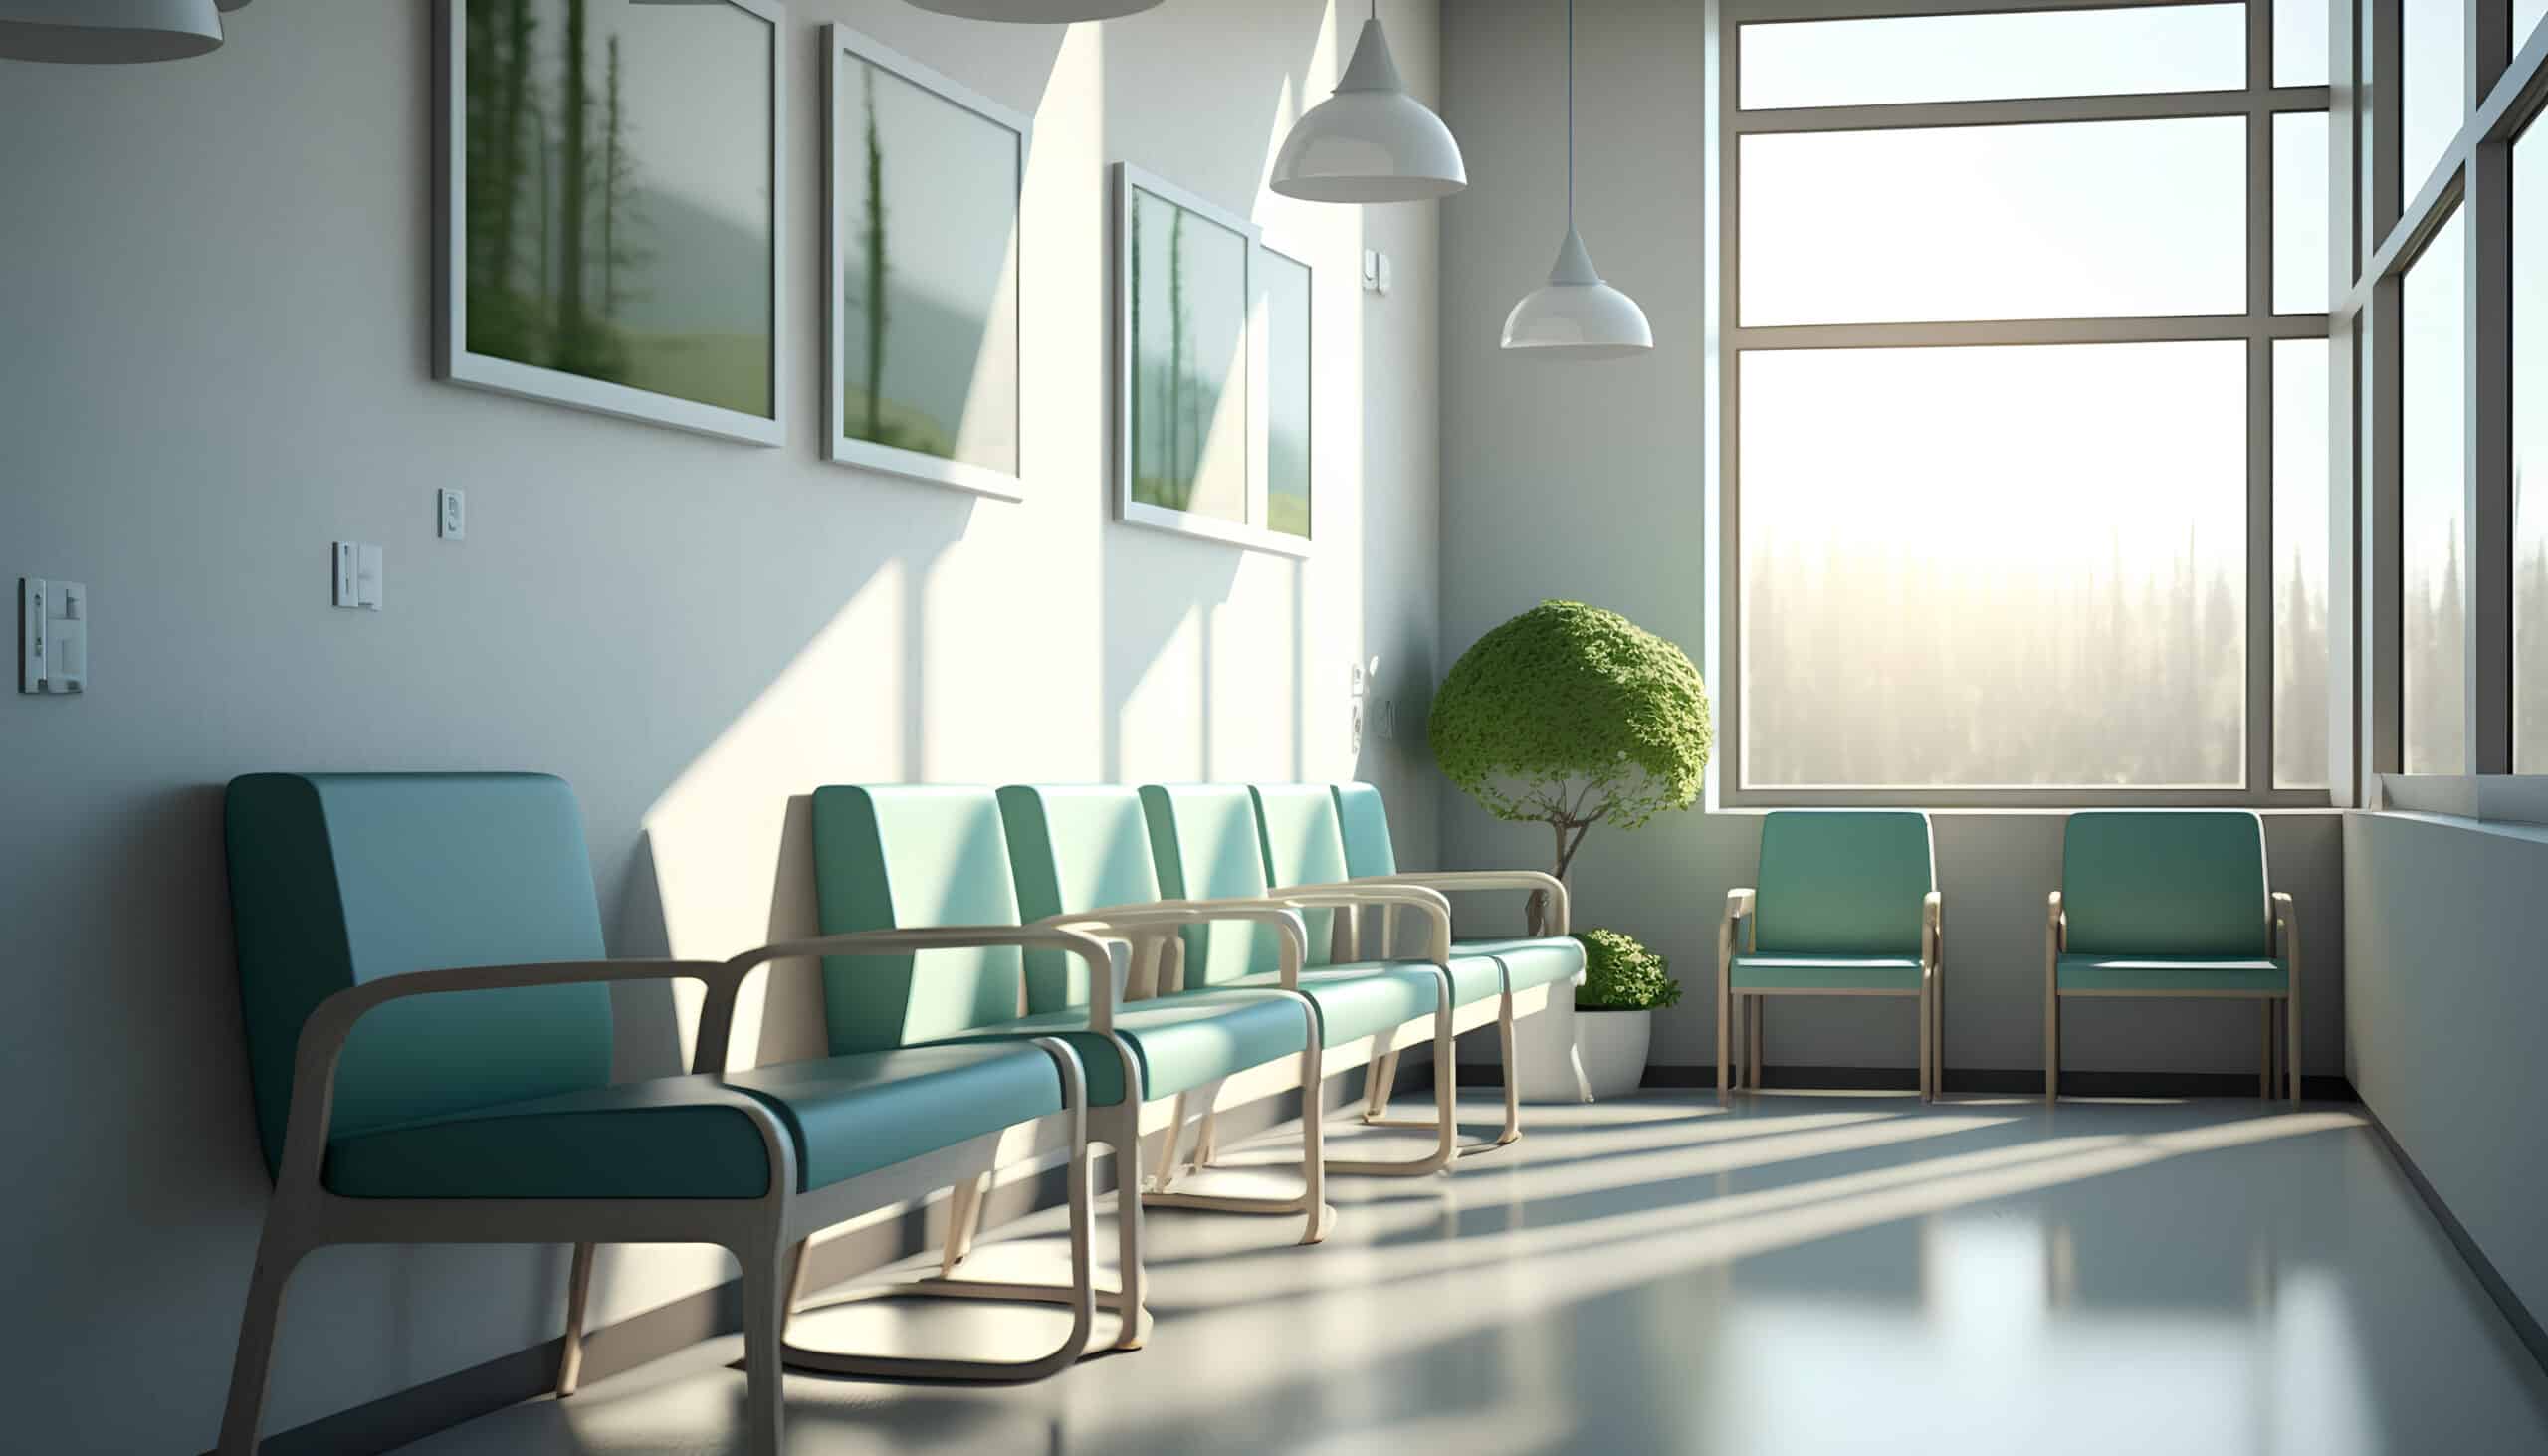 hospital waiting room with green chairs.